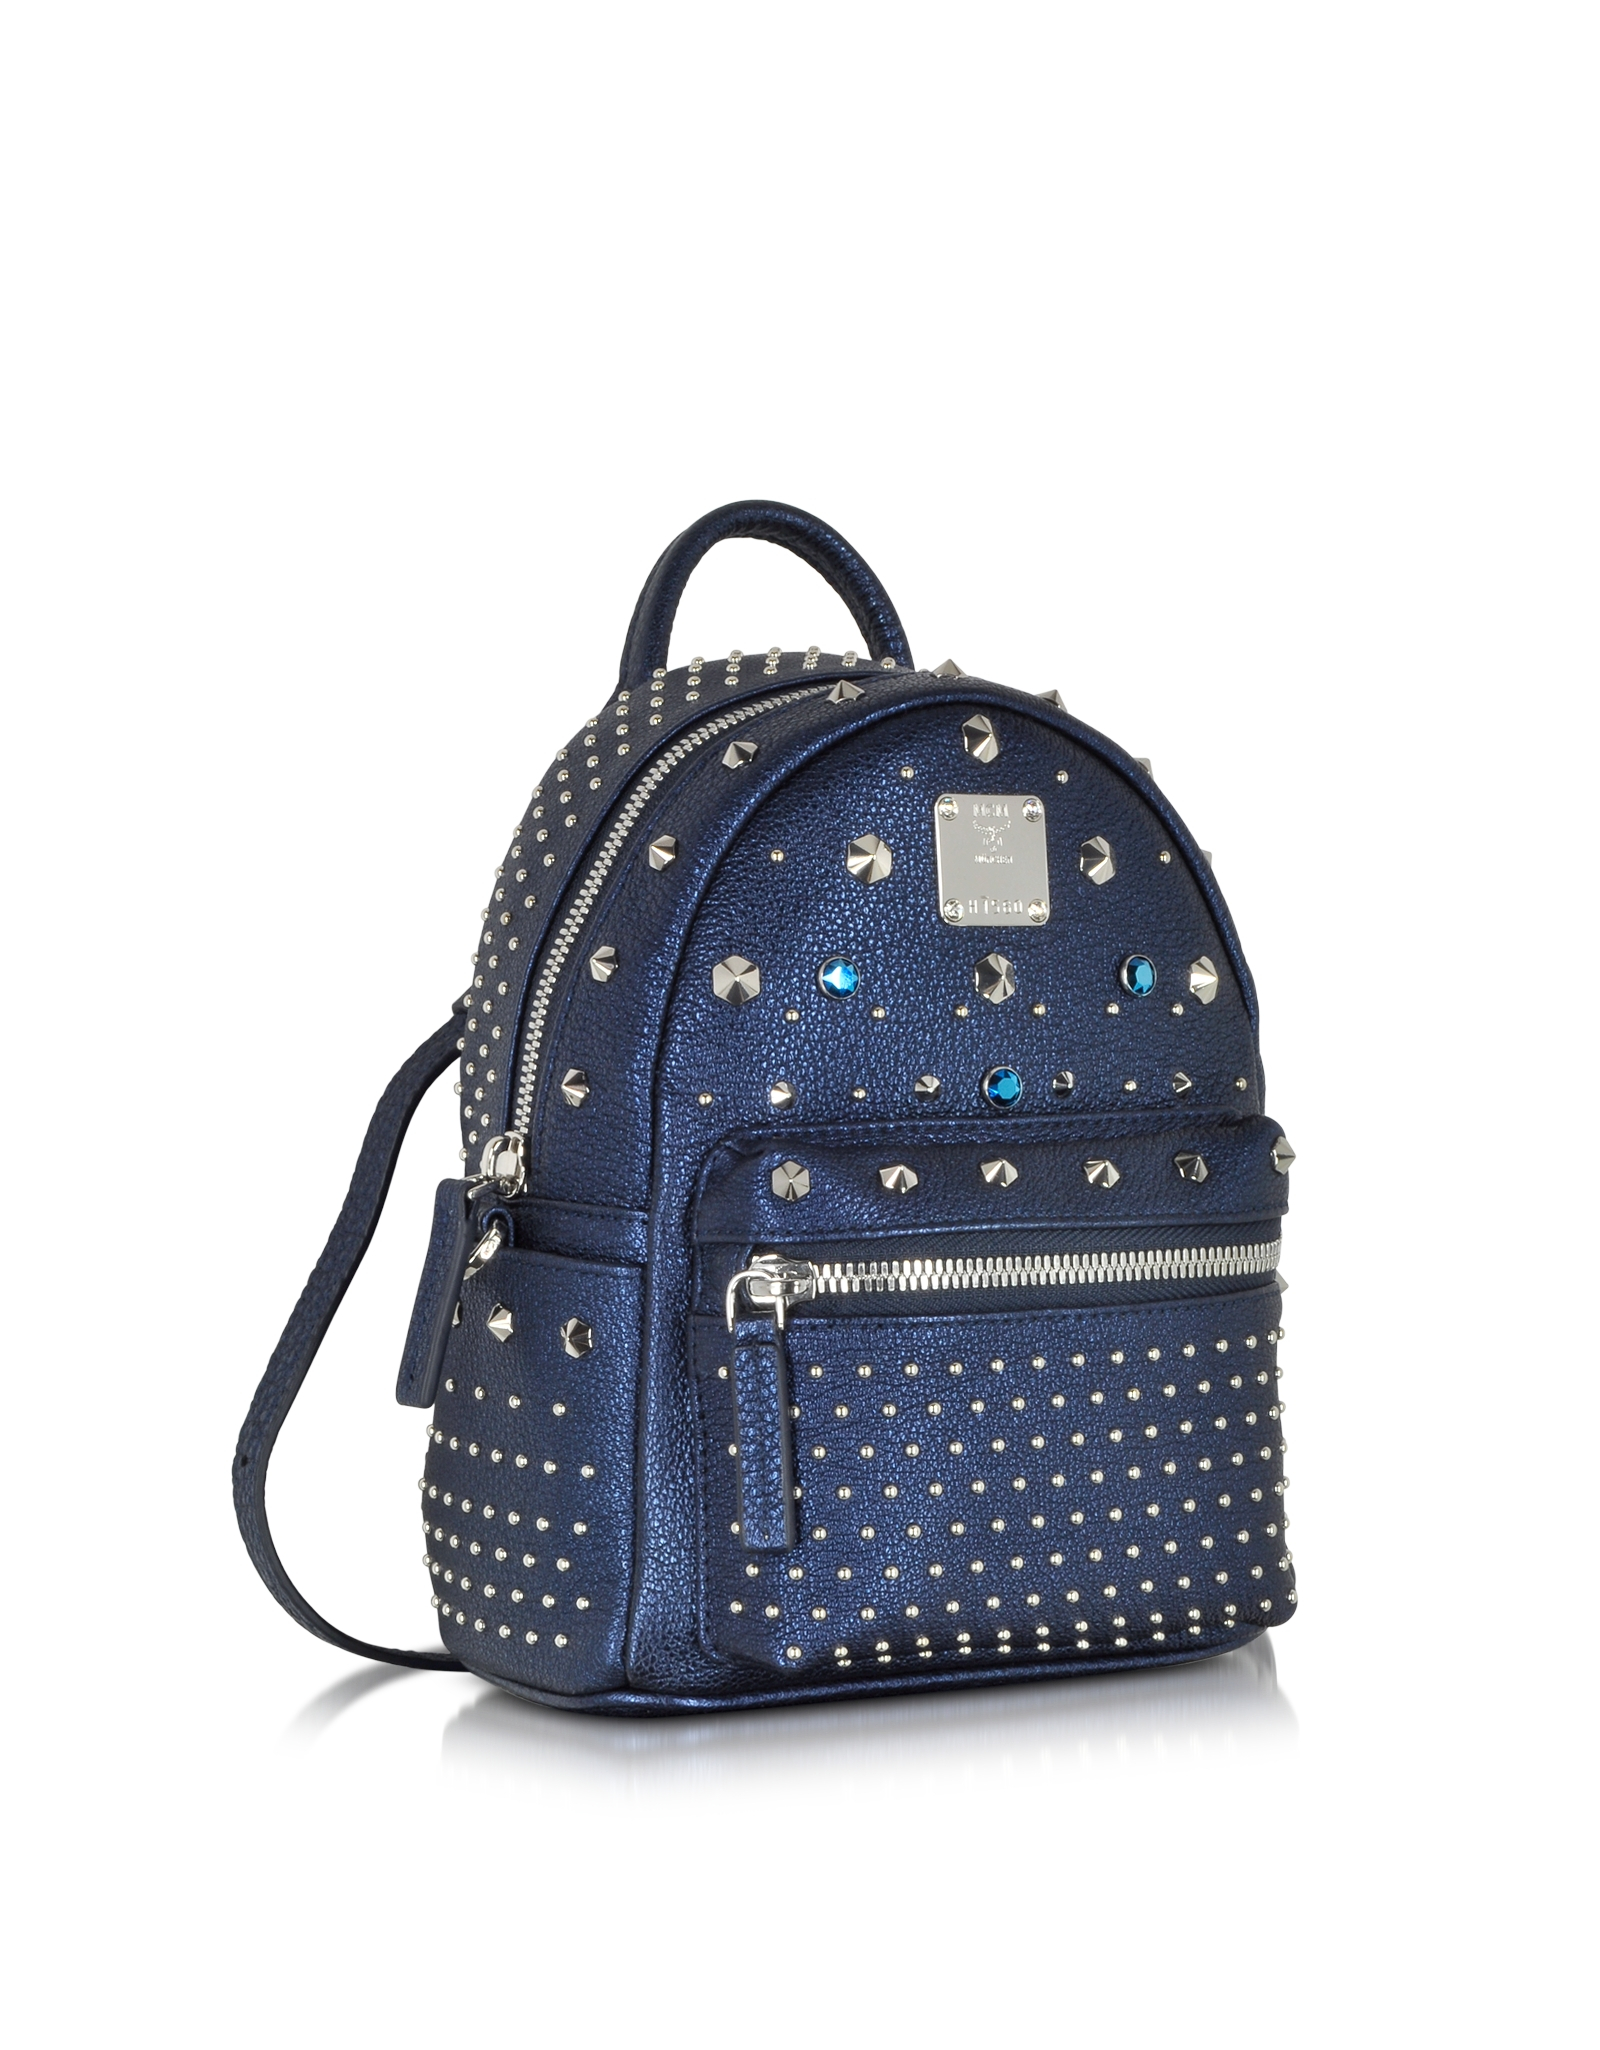 Mcm Stark Special Metallic Navy Leather X-Mini Backpack in Blue | Lyst